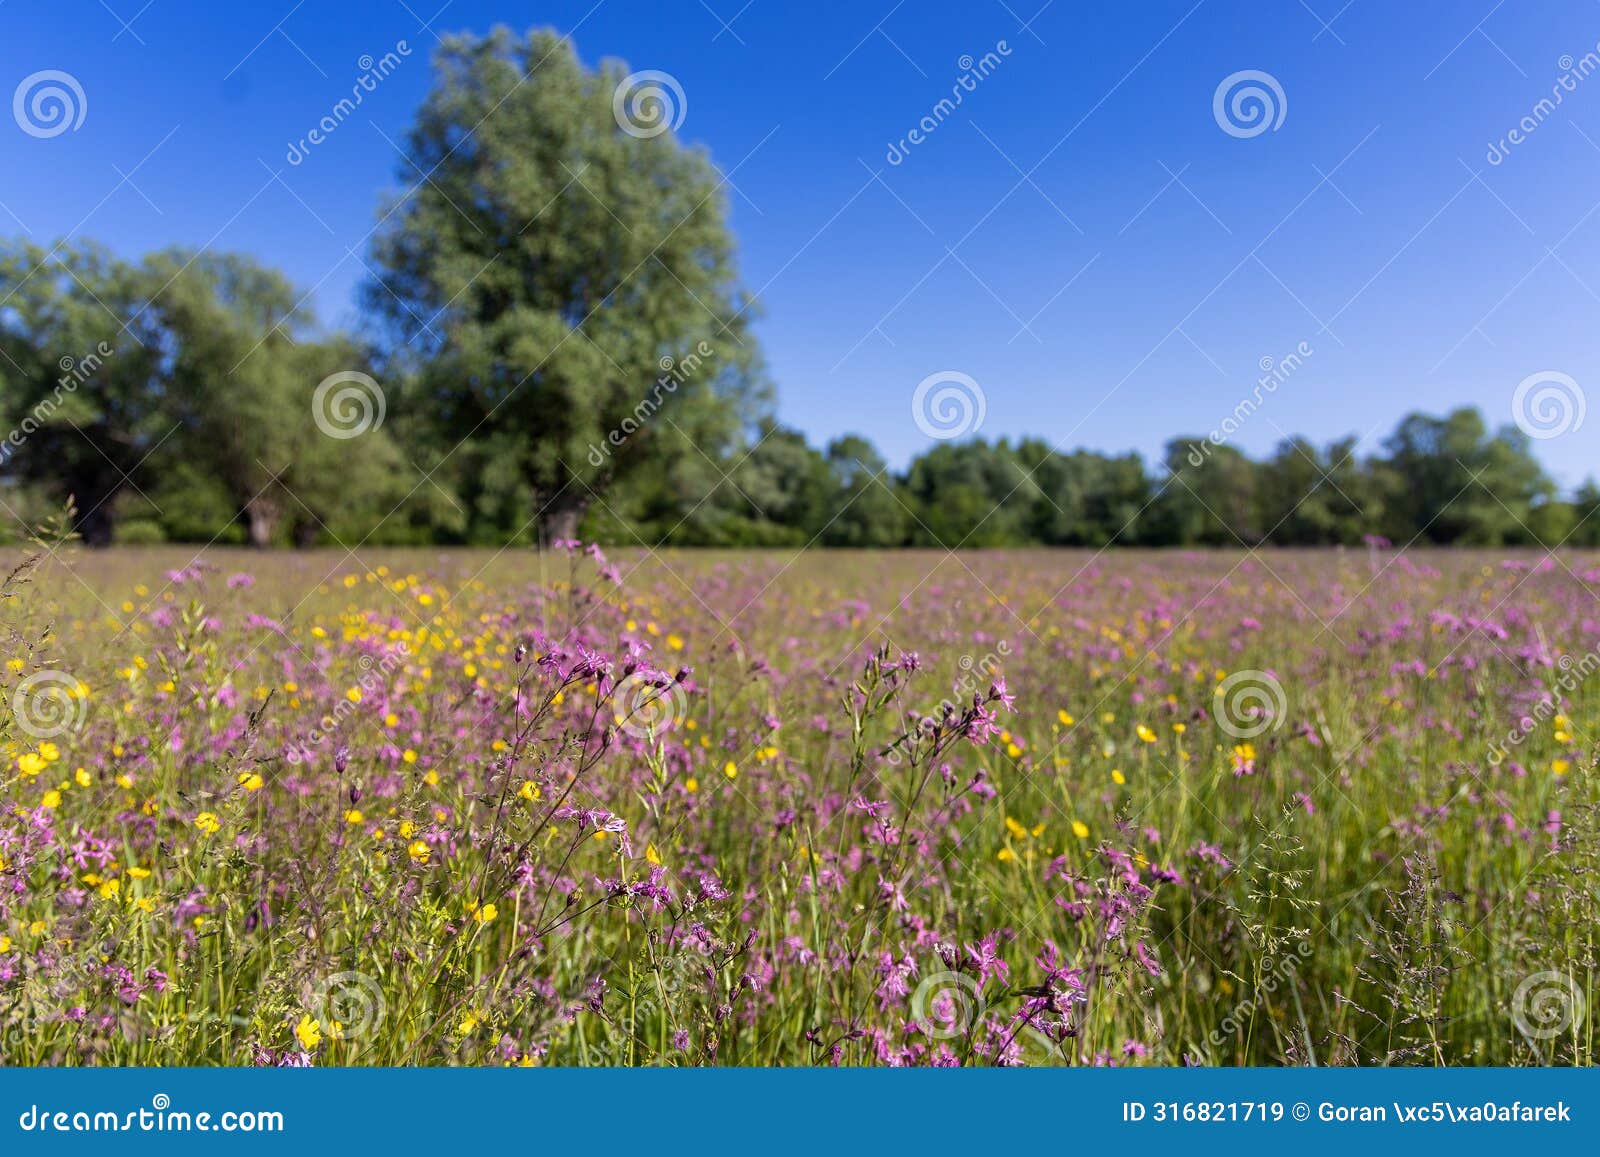 the meadow with silene flos-cuculi and ranunculus flowers